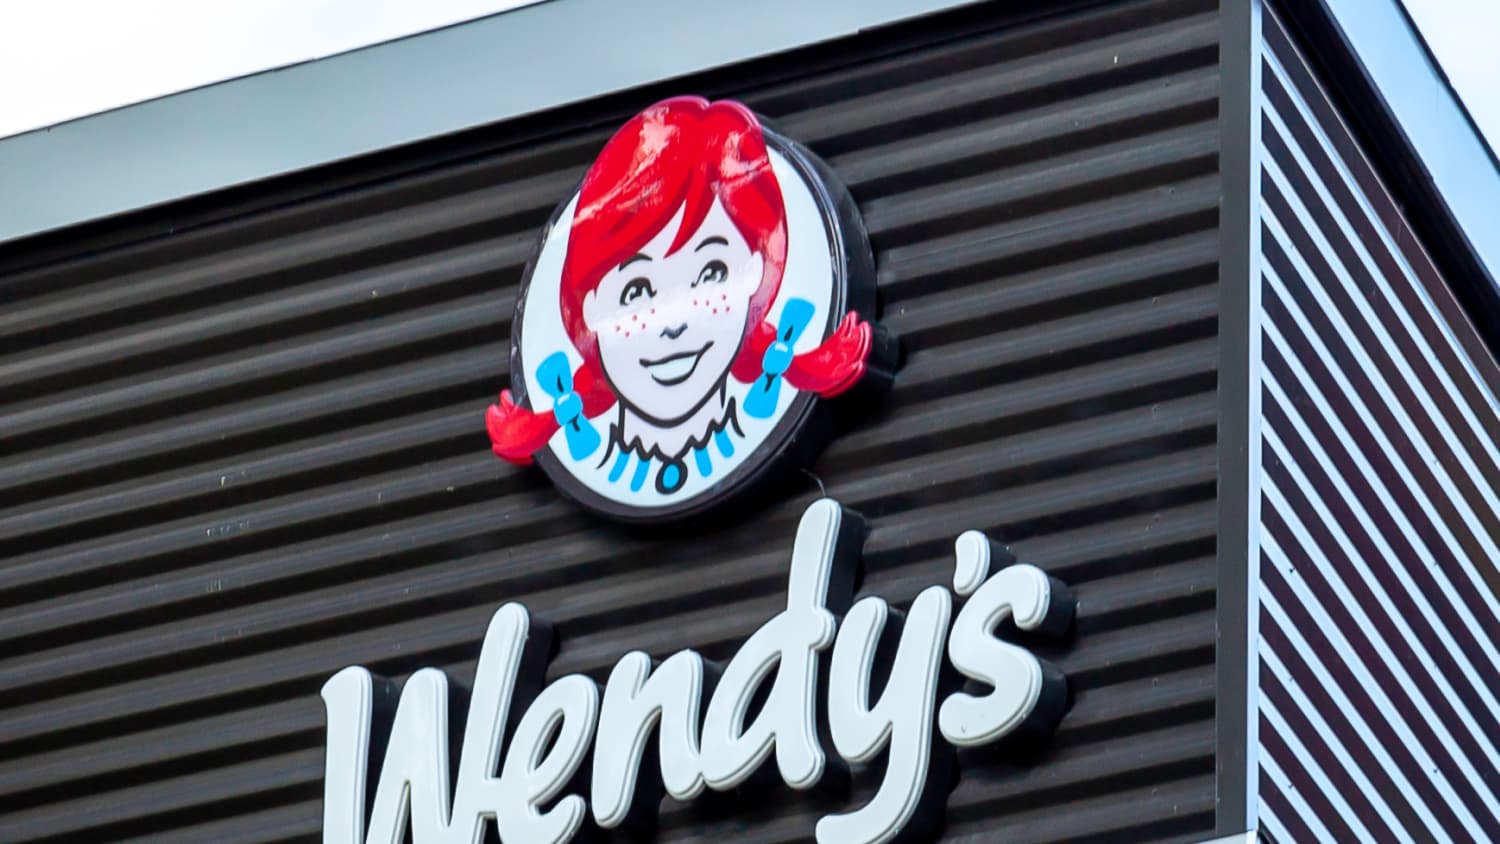 Wendy's famous chili is coming to a grocery store near you